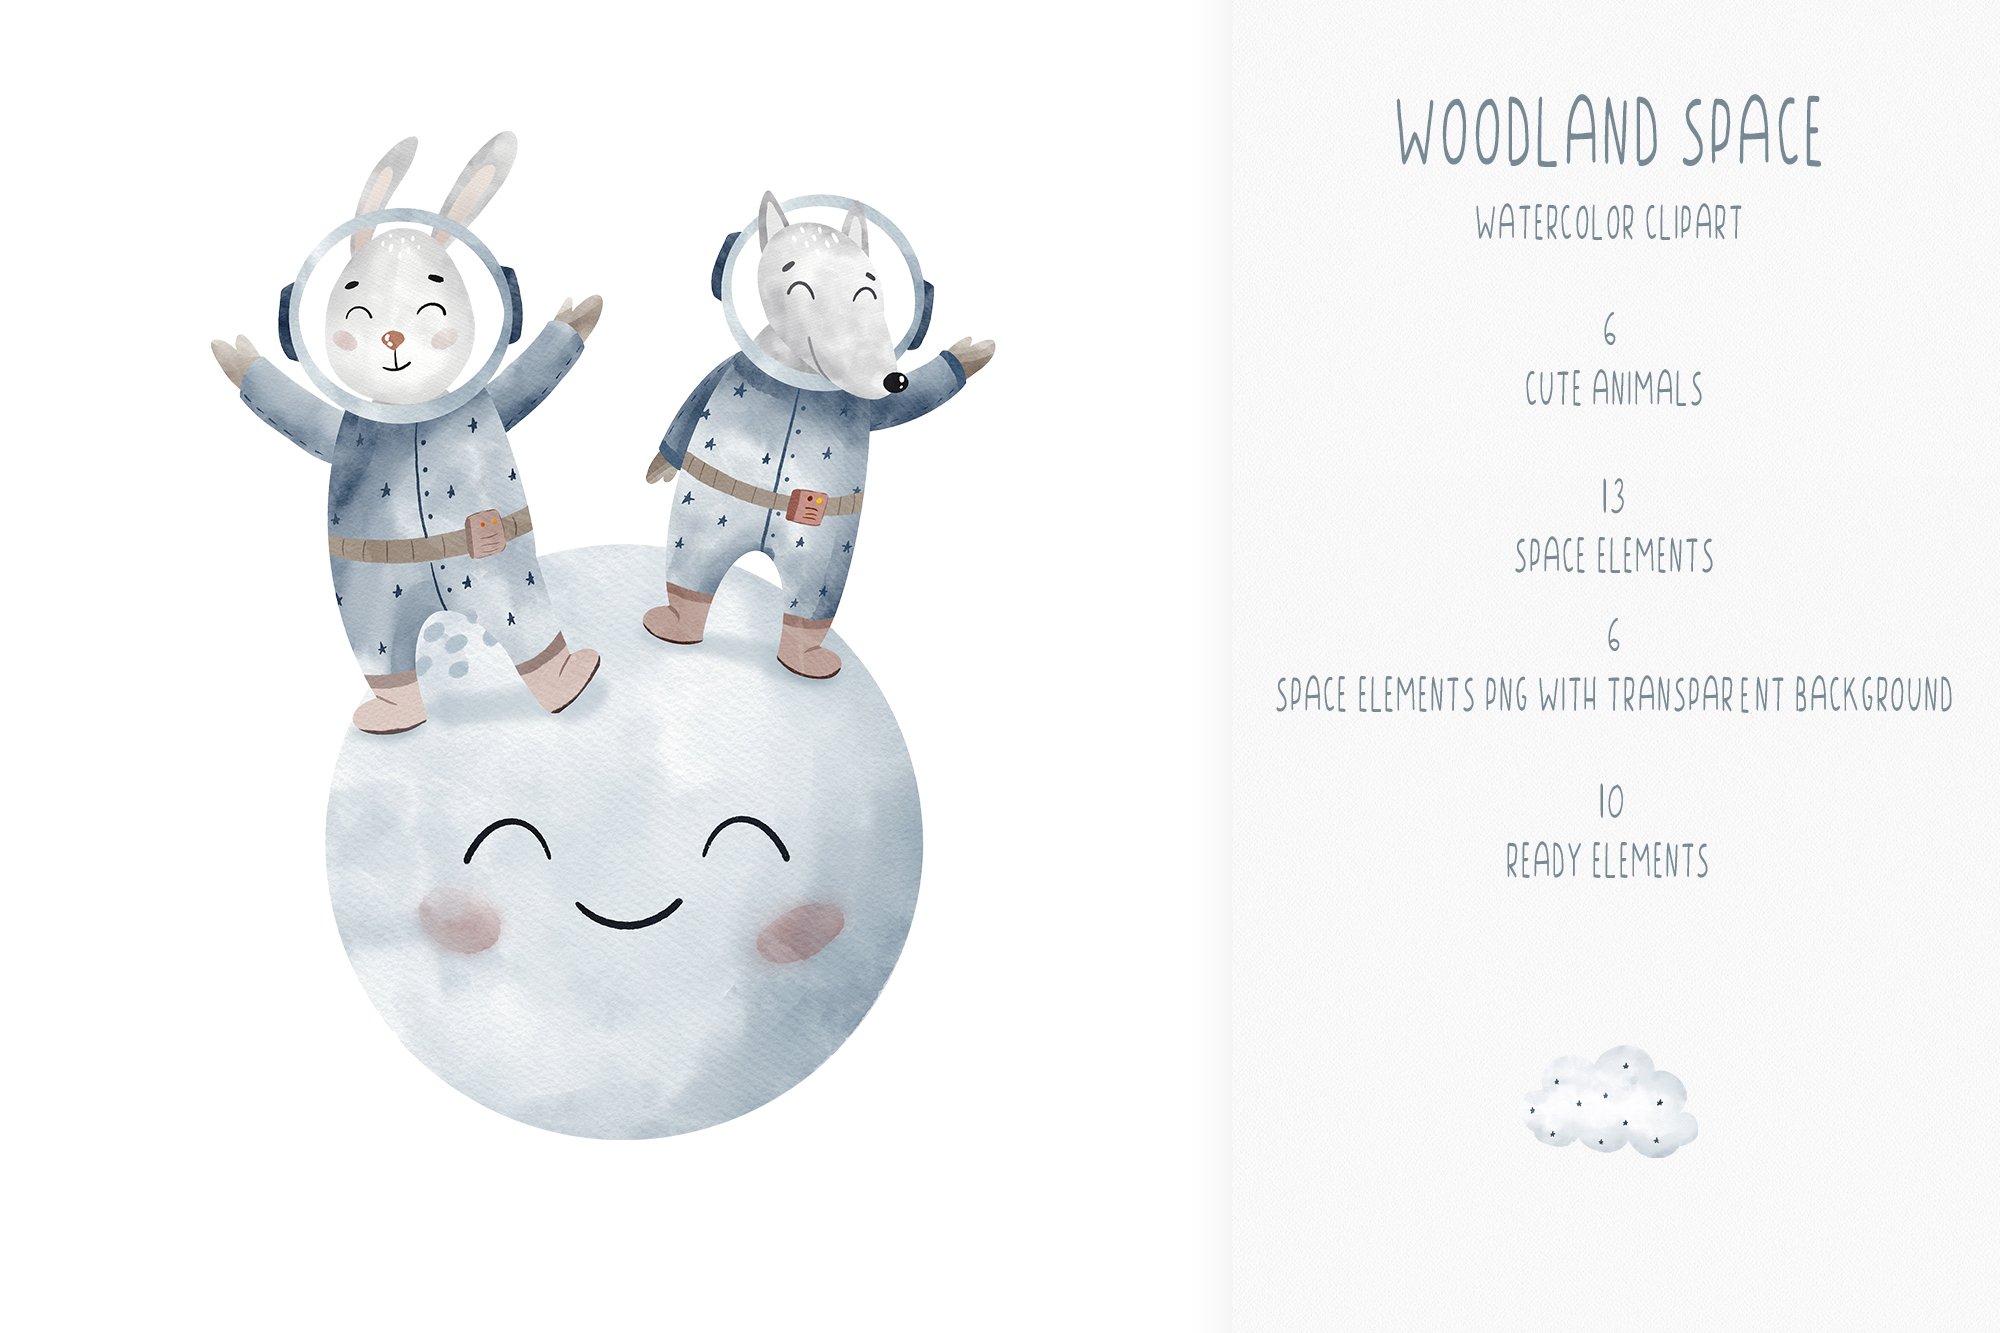 Watercolor woodland space clipart preview image.